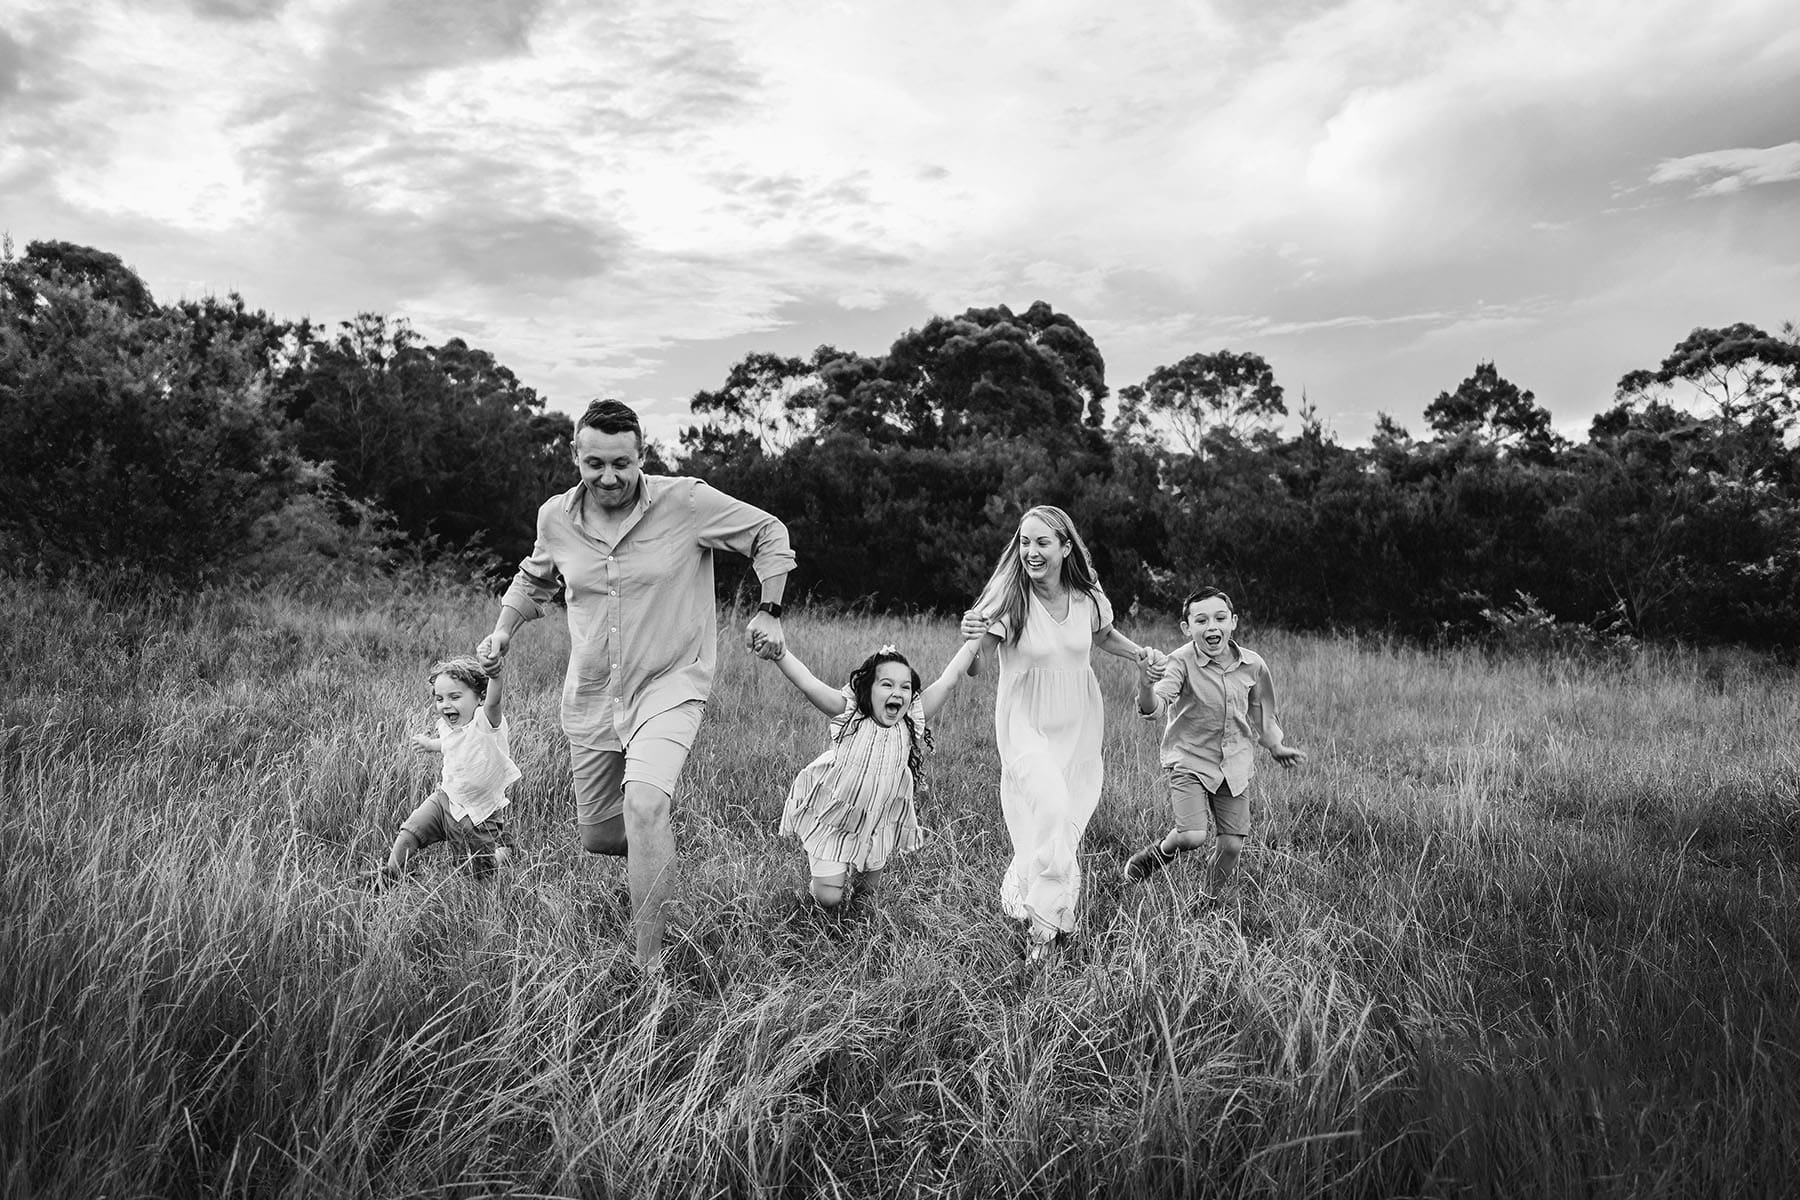 Parents run with their kids through a grassy field at sunset